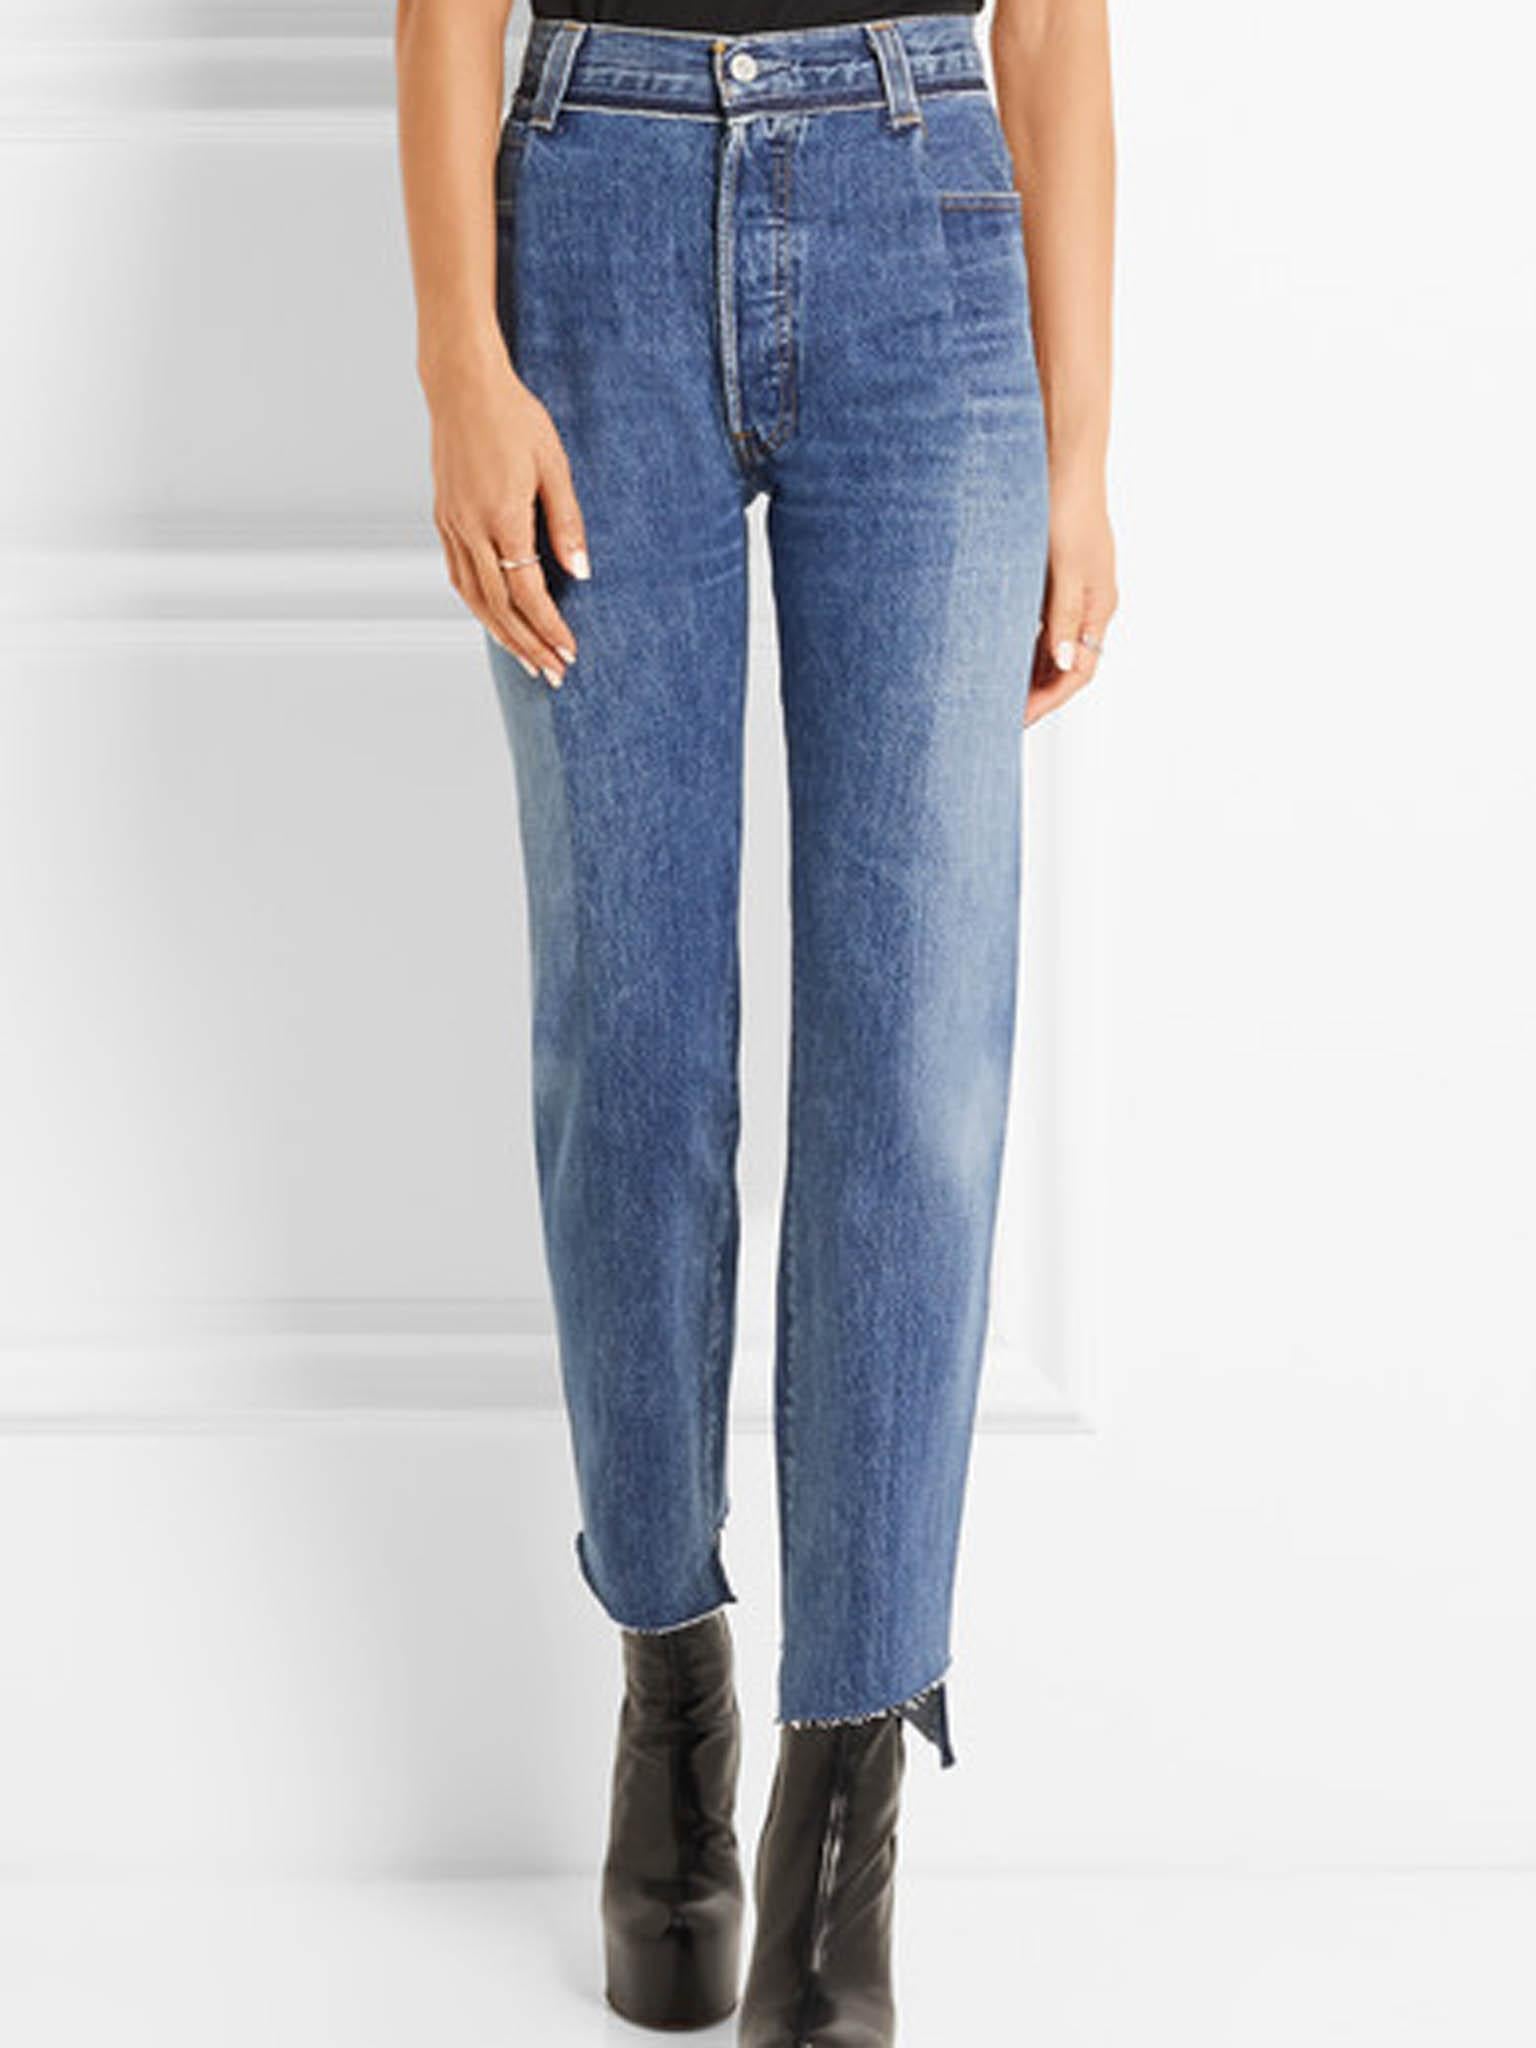 Vetements' Reworked high-rise slim-leg jeans are incessantly out of stock